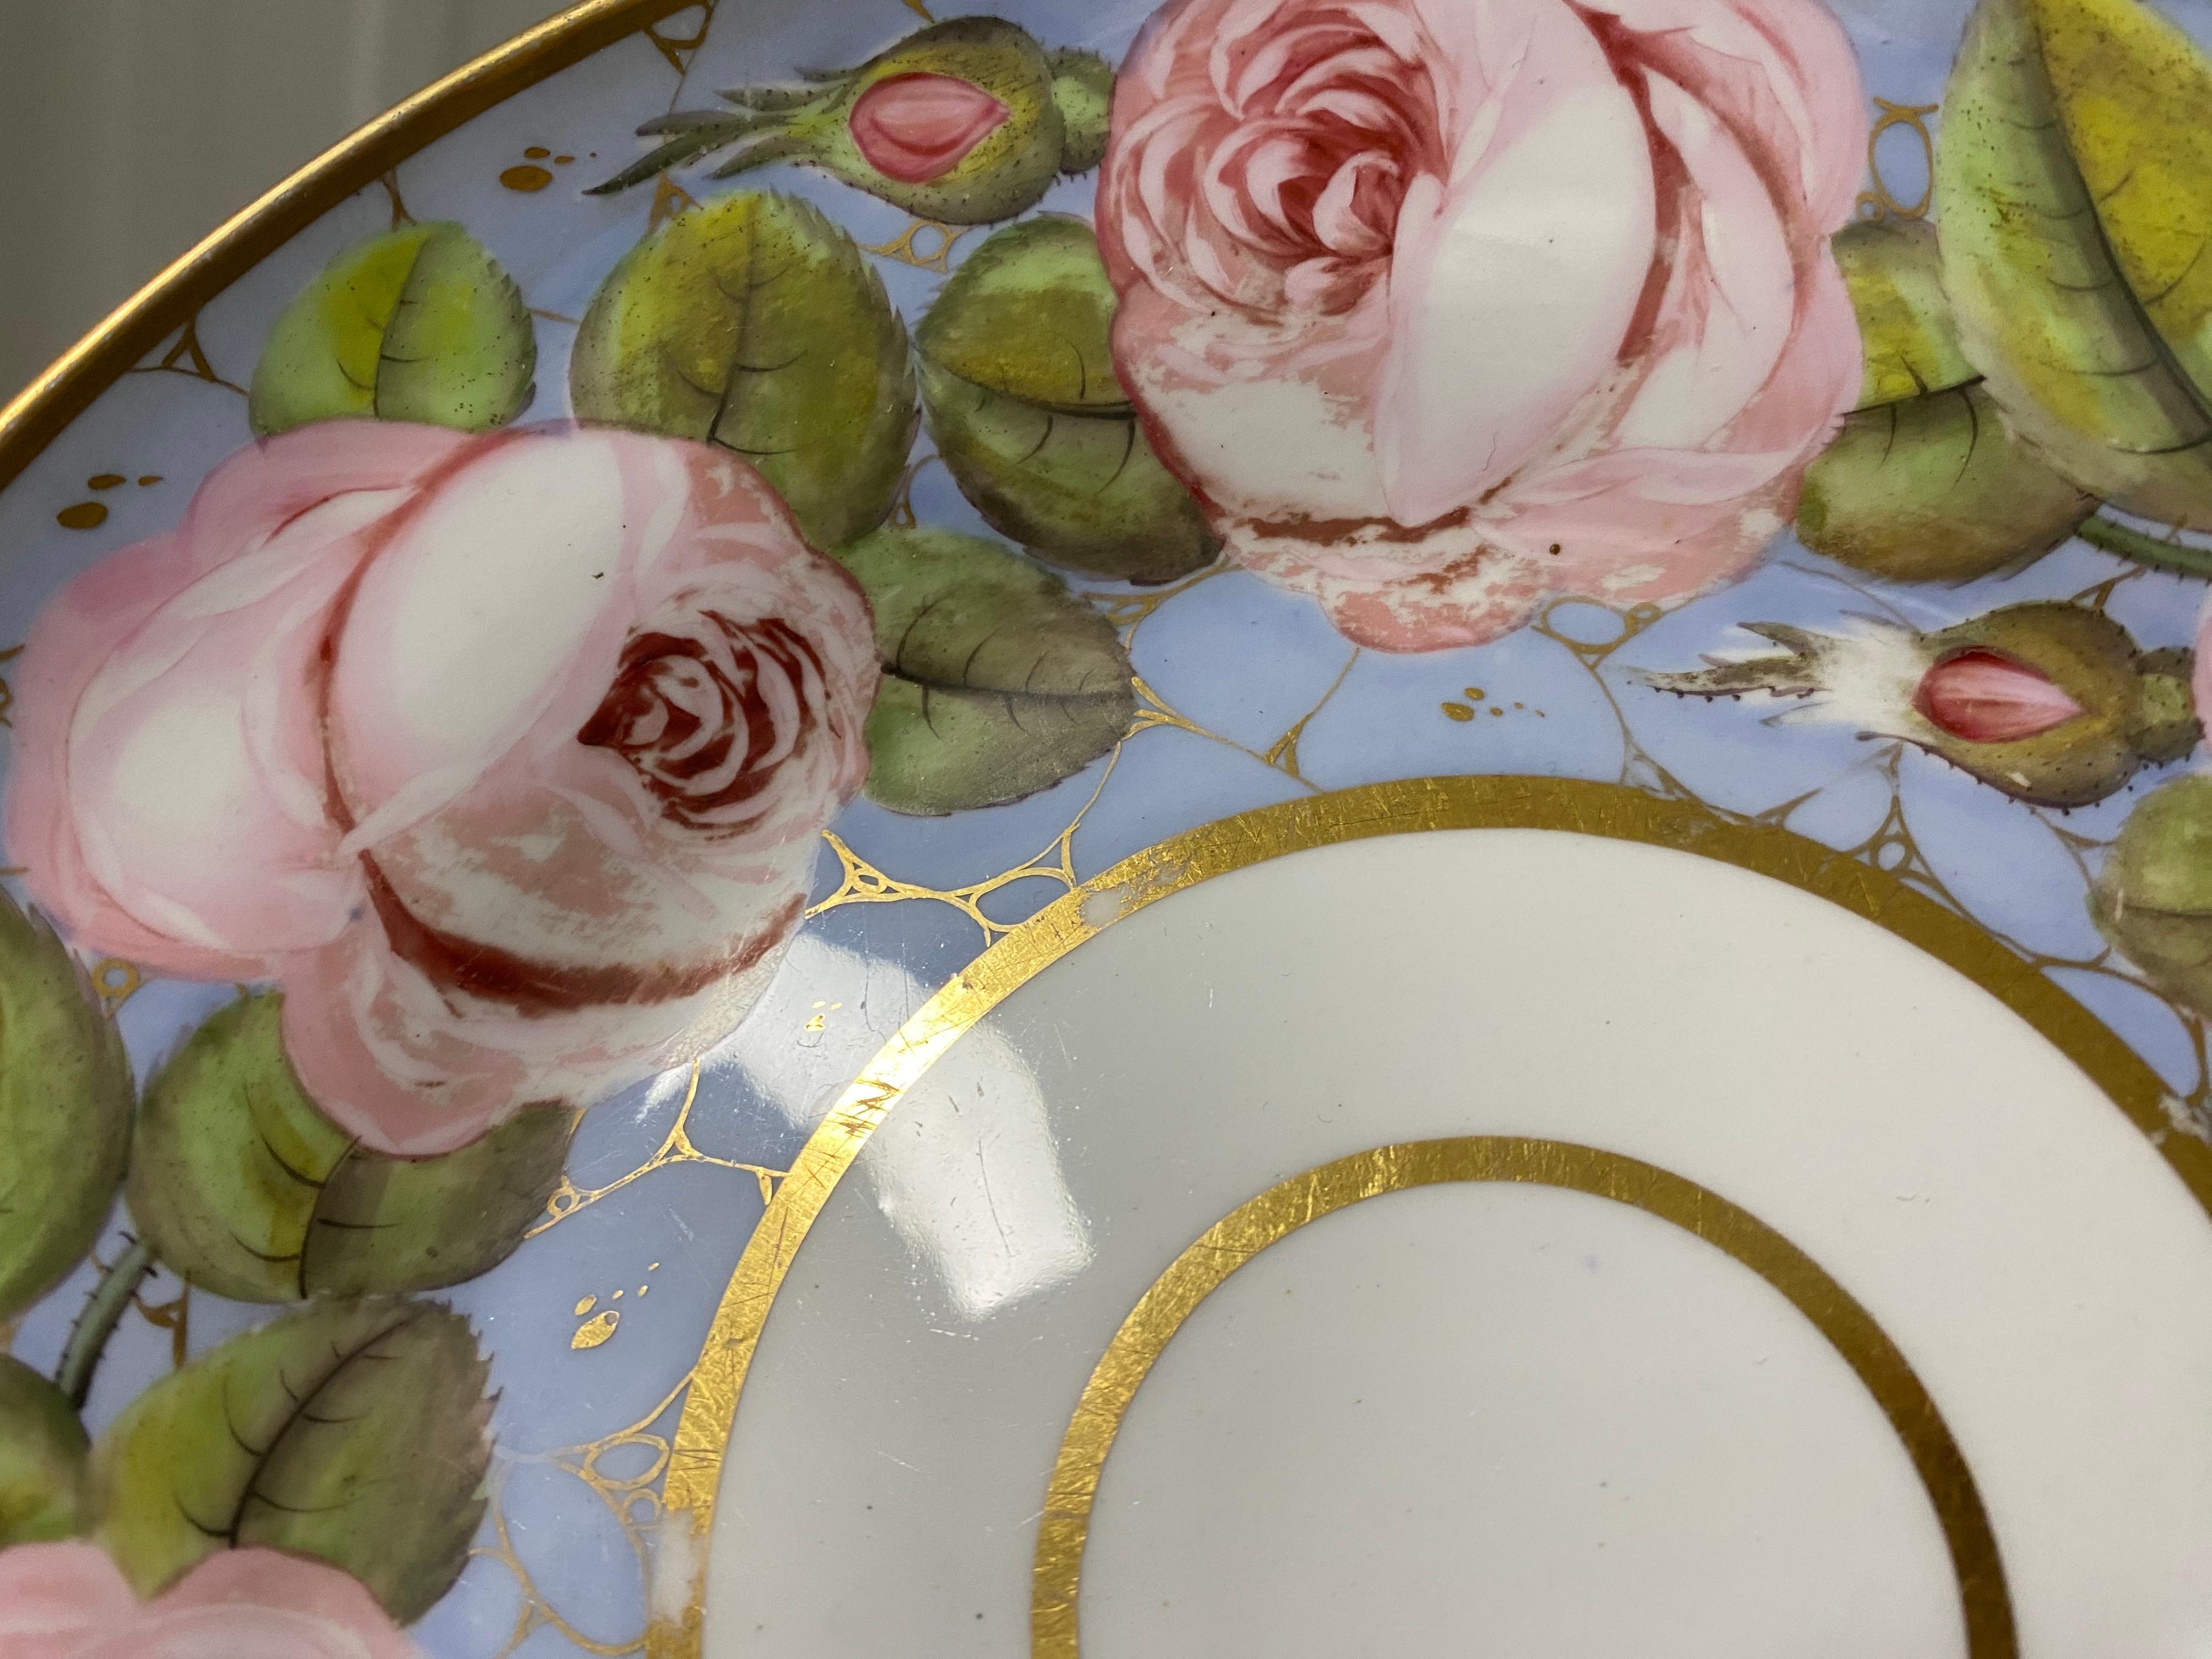 Spode Porcelain Hand-painted Rose Plate, English, 19th Century
Marked underside 2/183 in yellow
From a Private Collection in Manhattan.
Good overall condition, minor losses, hairline crack shown backside.

8.5